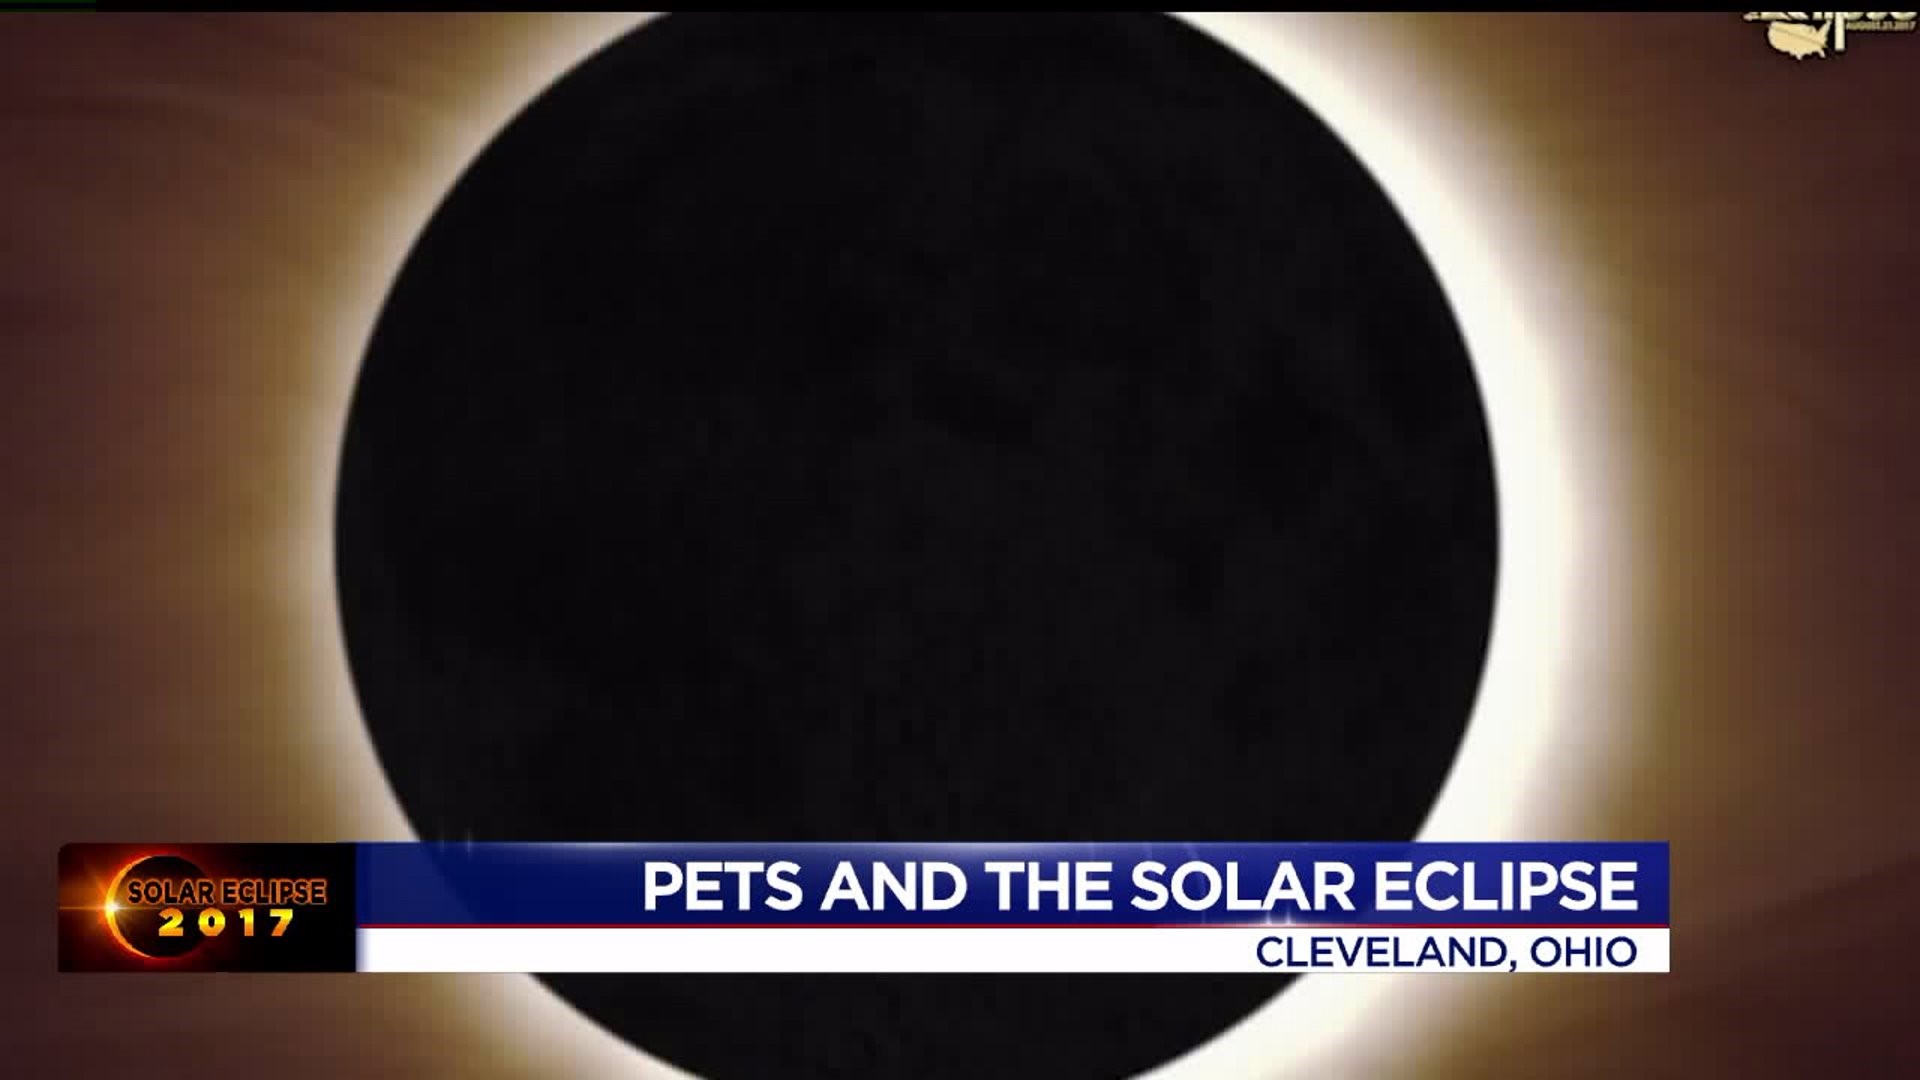 PETS AND THE SOLAR ECLIPSE